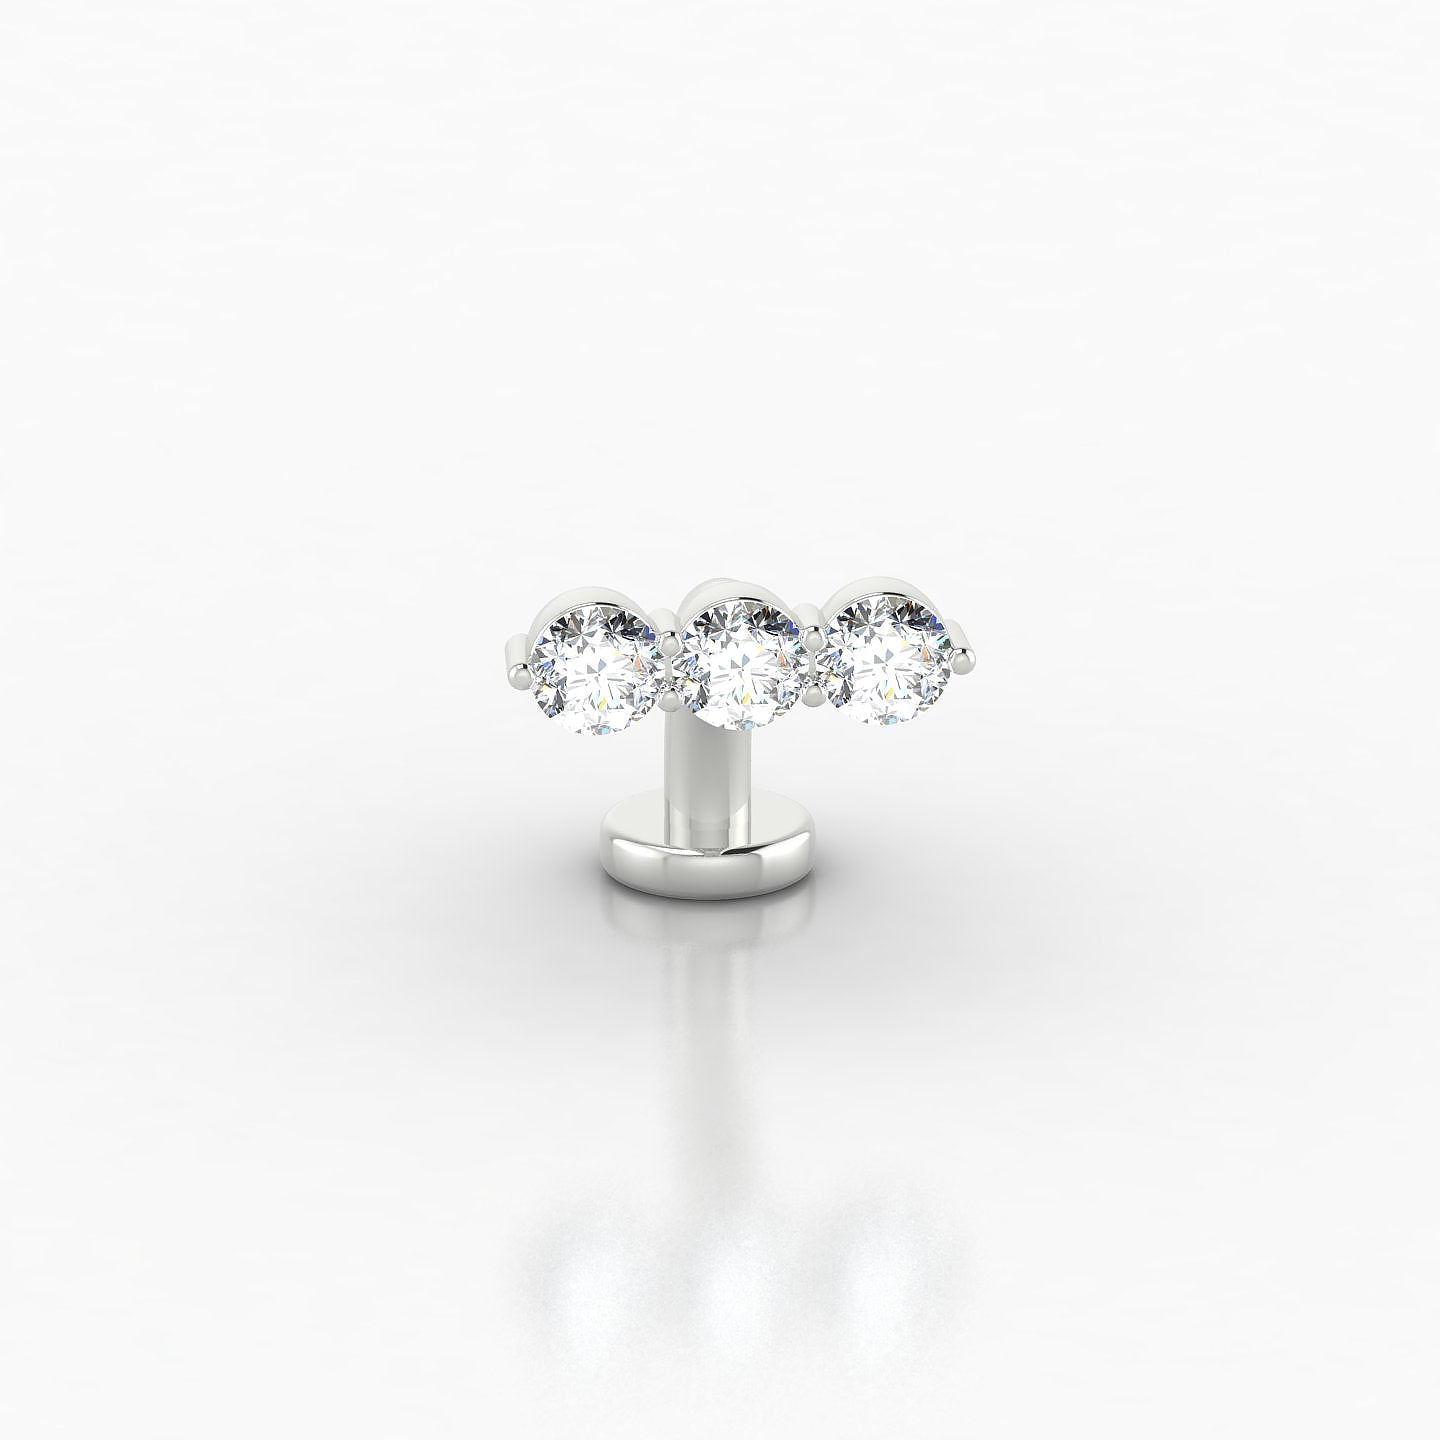 Ma'at | 18k White Gold 8 mm 9 mm Trilogy Diamond Floating Navel Piercing